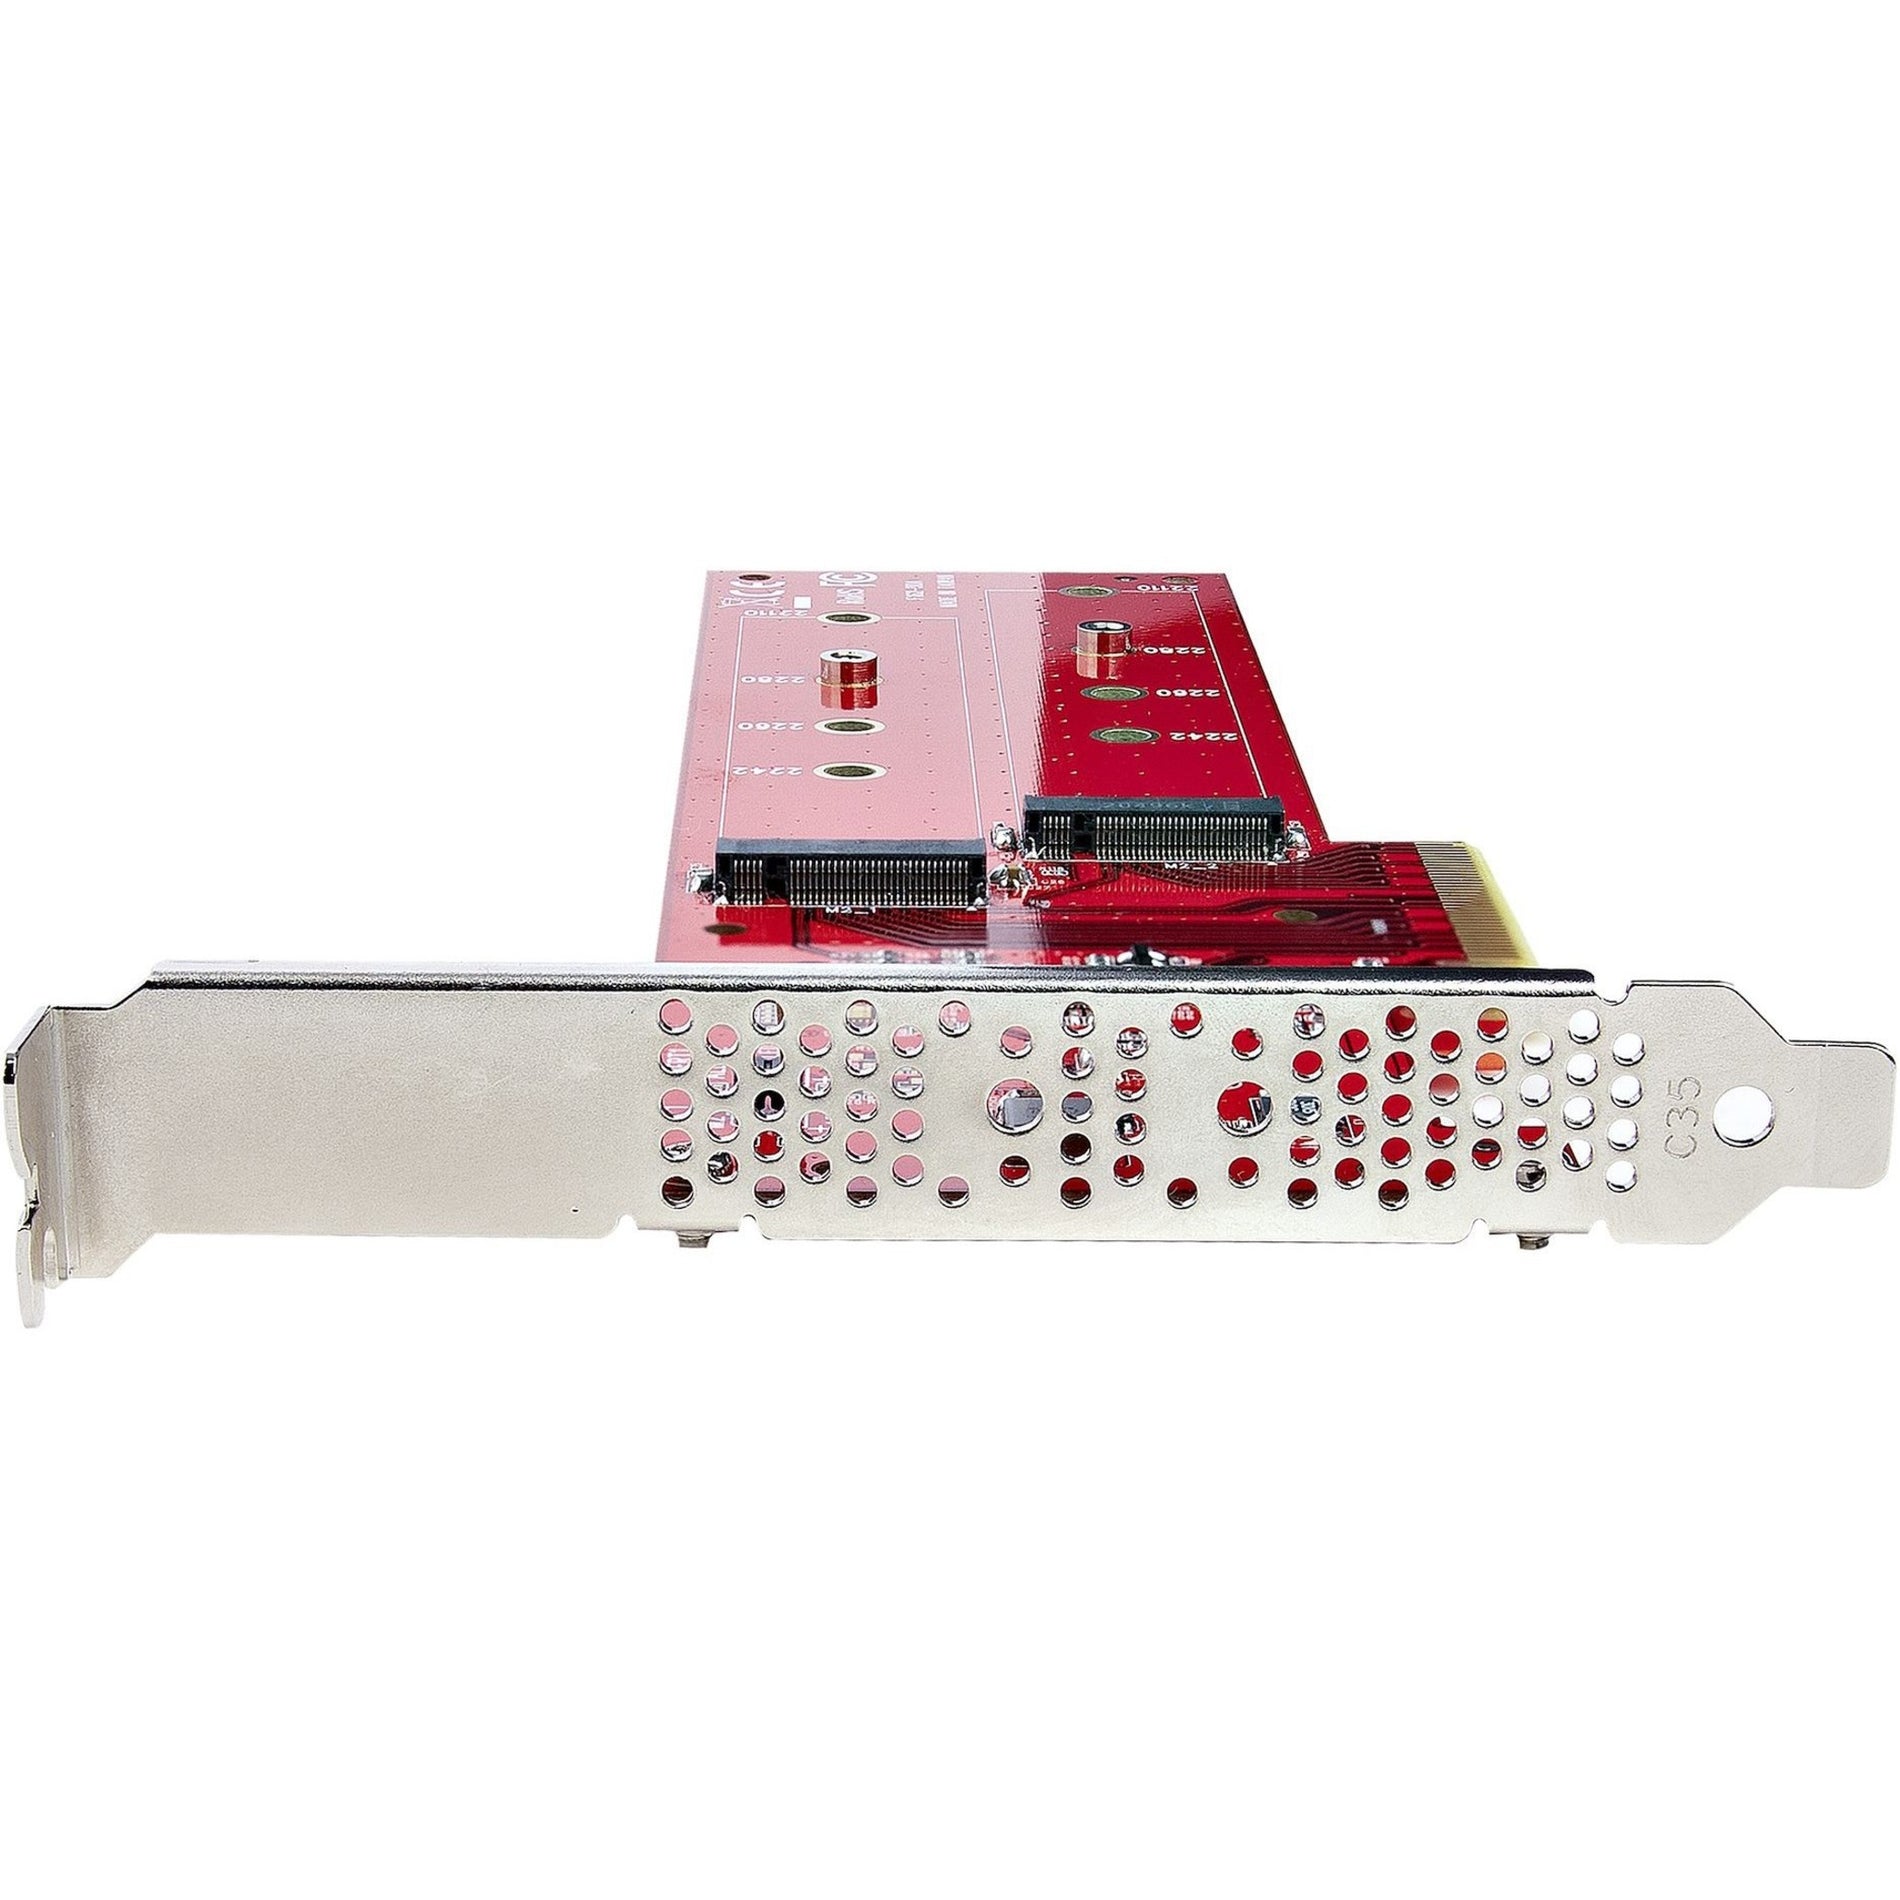 StarTech.com DUAL-M2-PCIE-CARD-B PCIe to M.2 Adapter Card, Dual NVMe or AHCI M.2 SSD to PCI Express 4.0, Up to 7.8GBps/Drive, Bifurcation Required